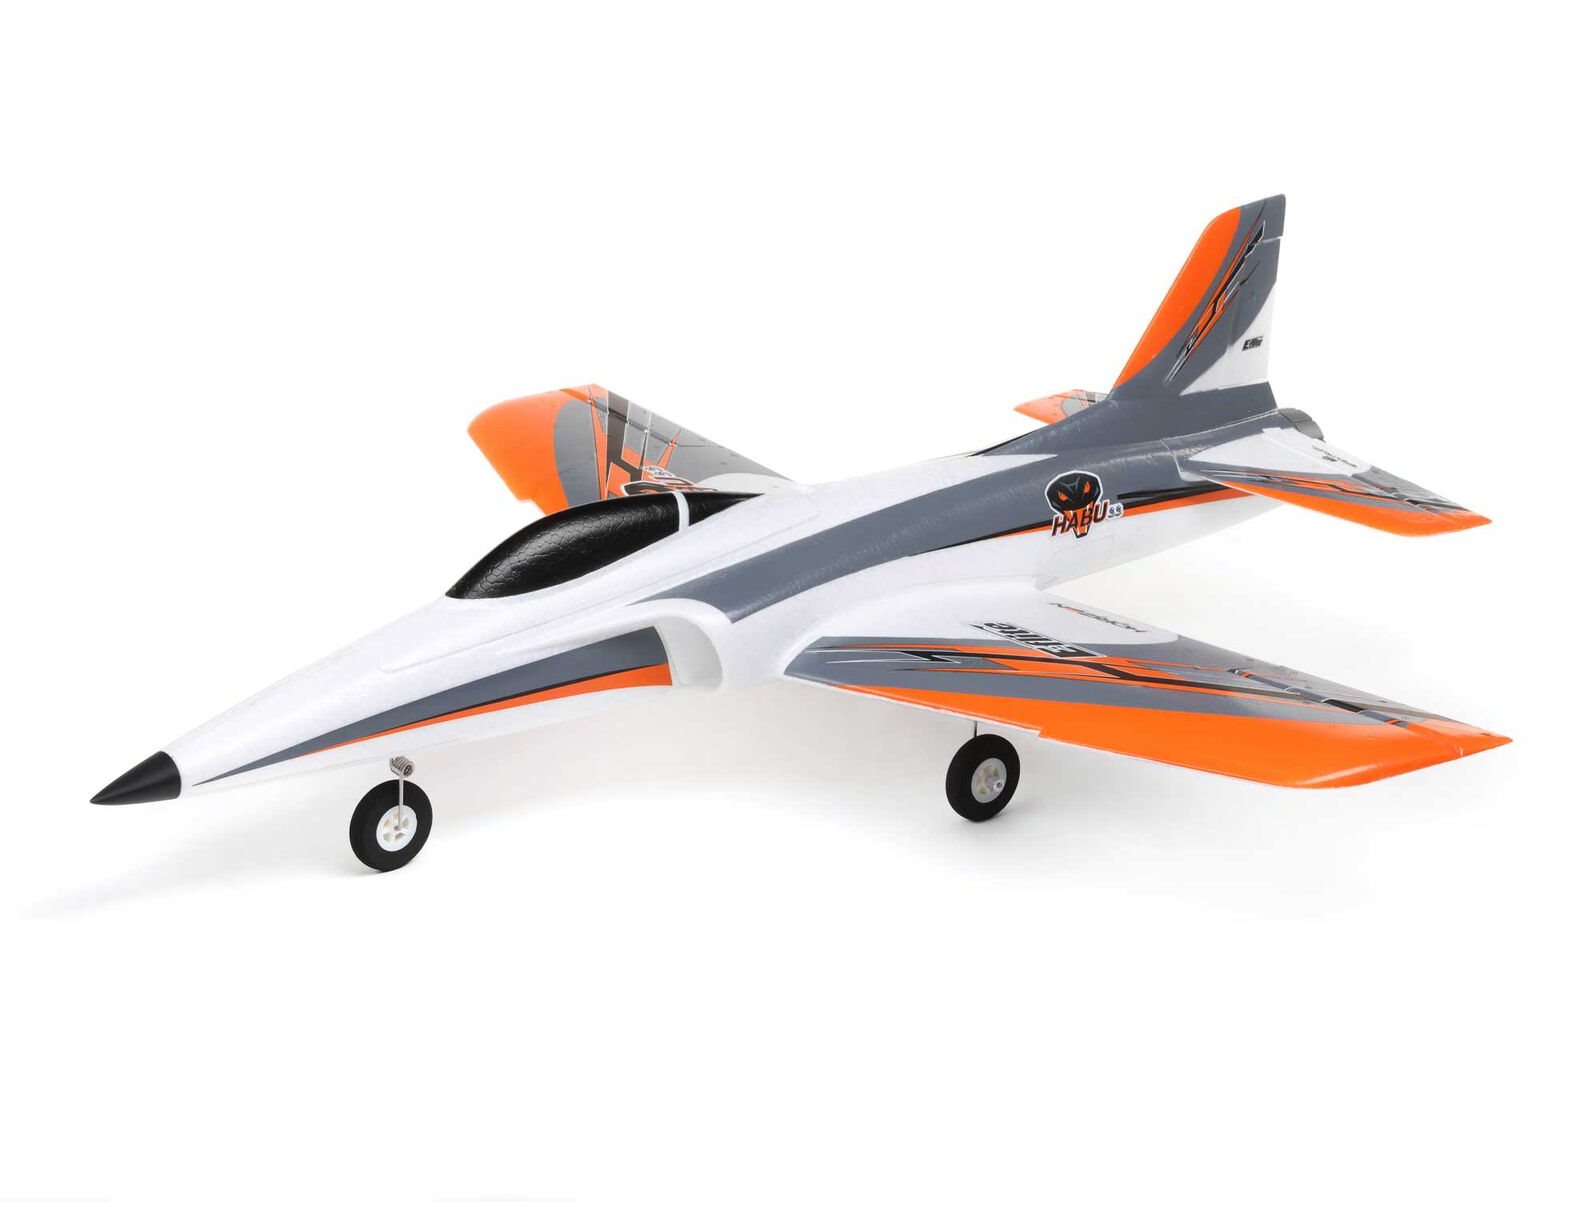 E-Flite Habu SS (Super Sport) 50mm EDF Jet BNF Basic with SAFE Select an